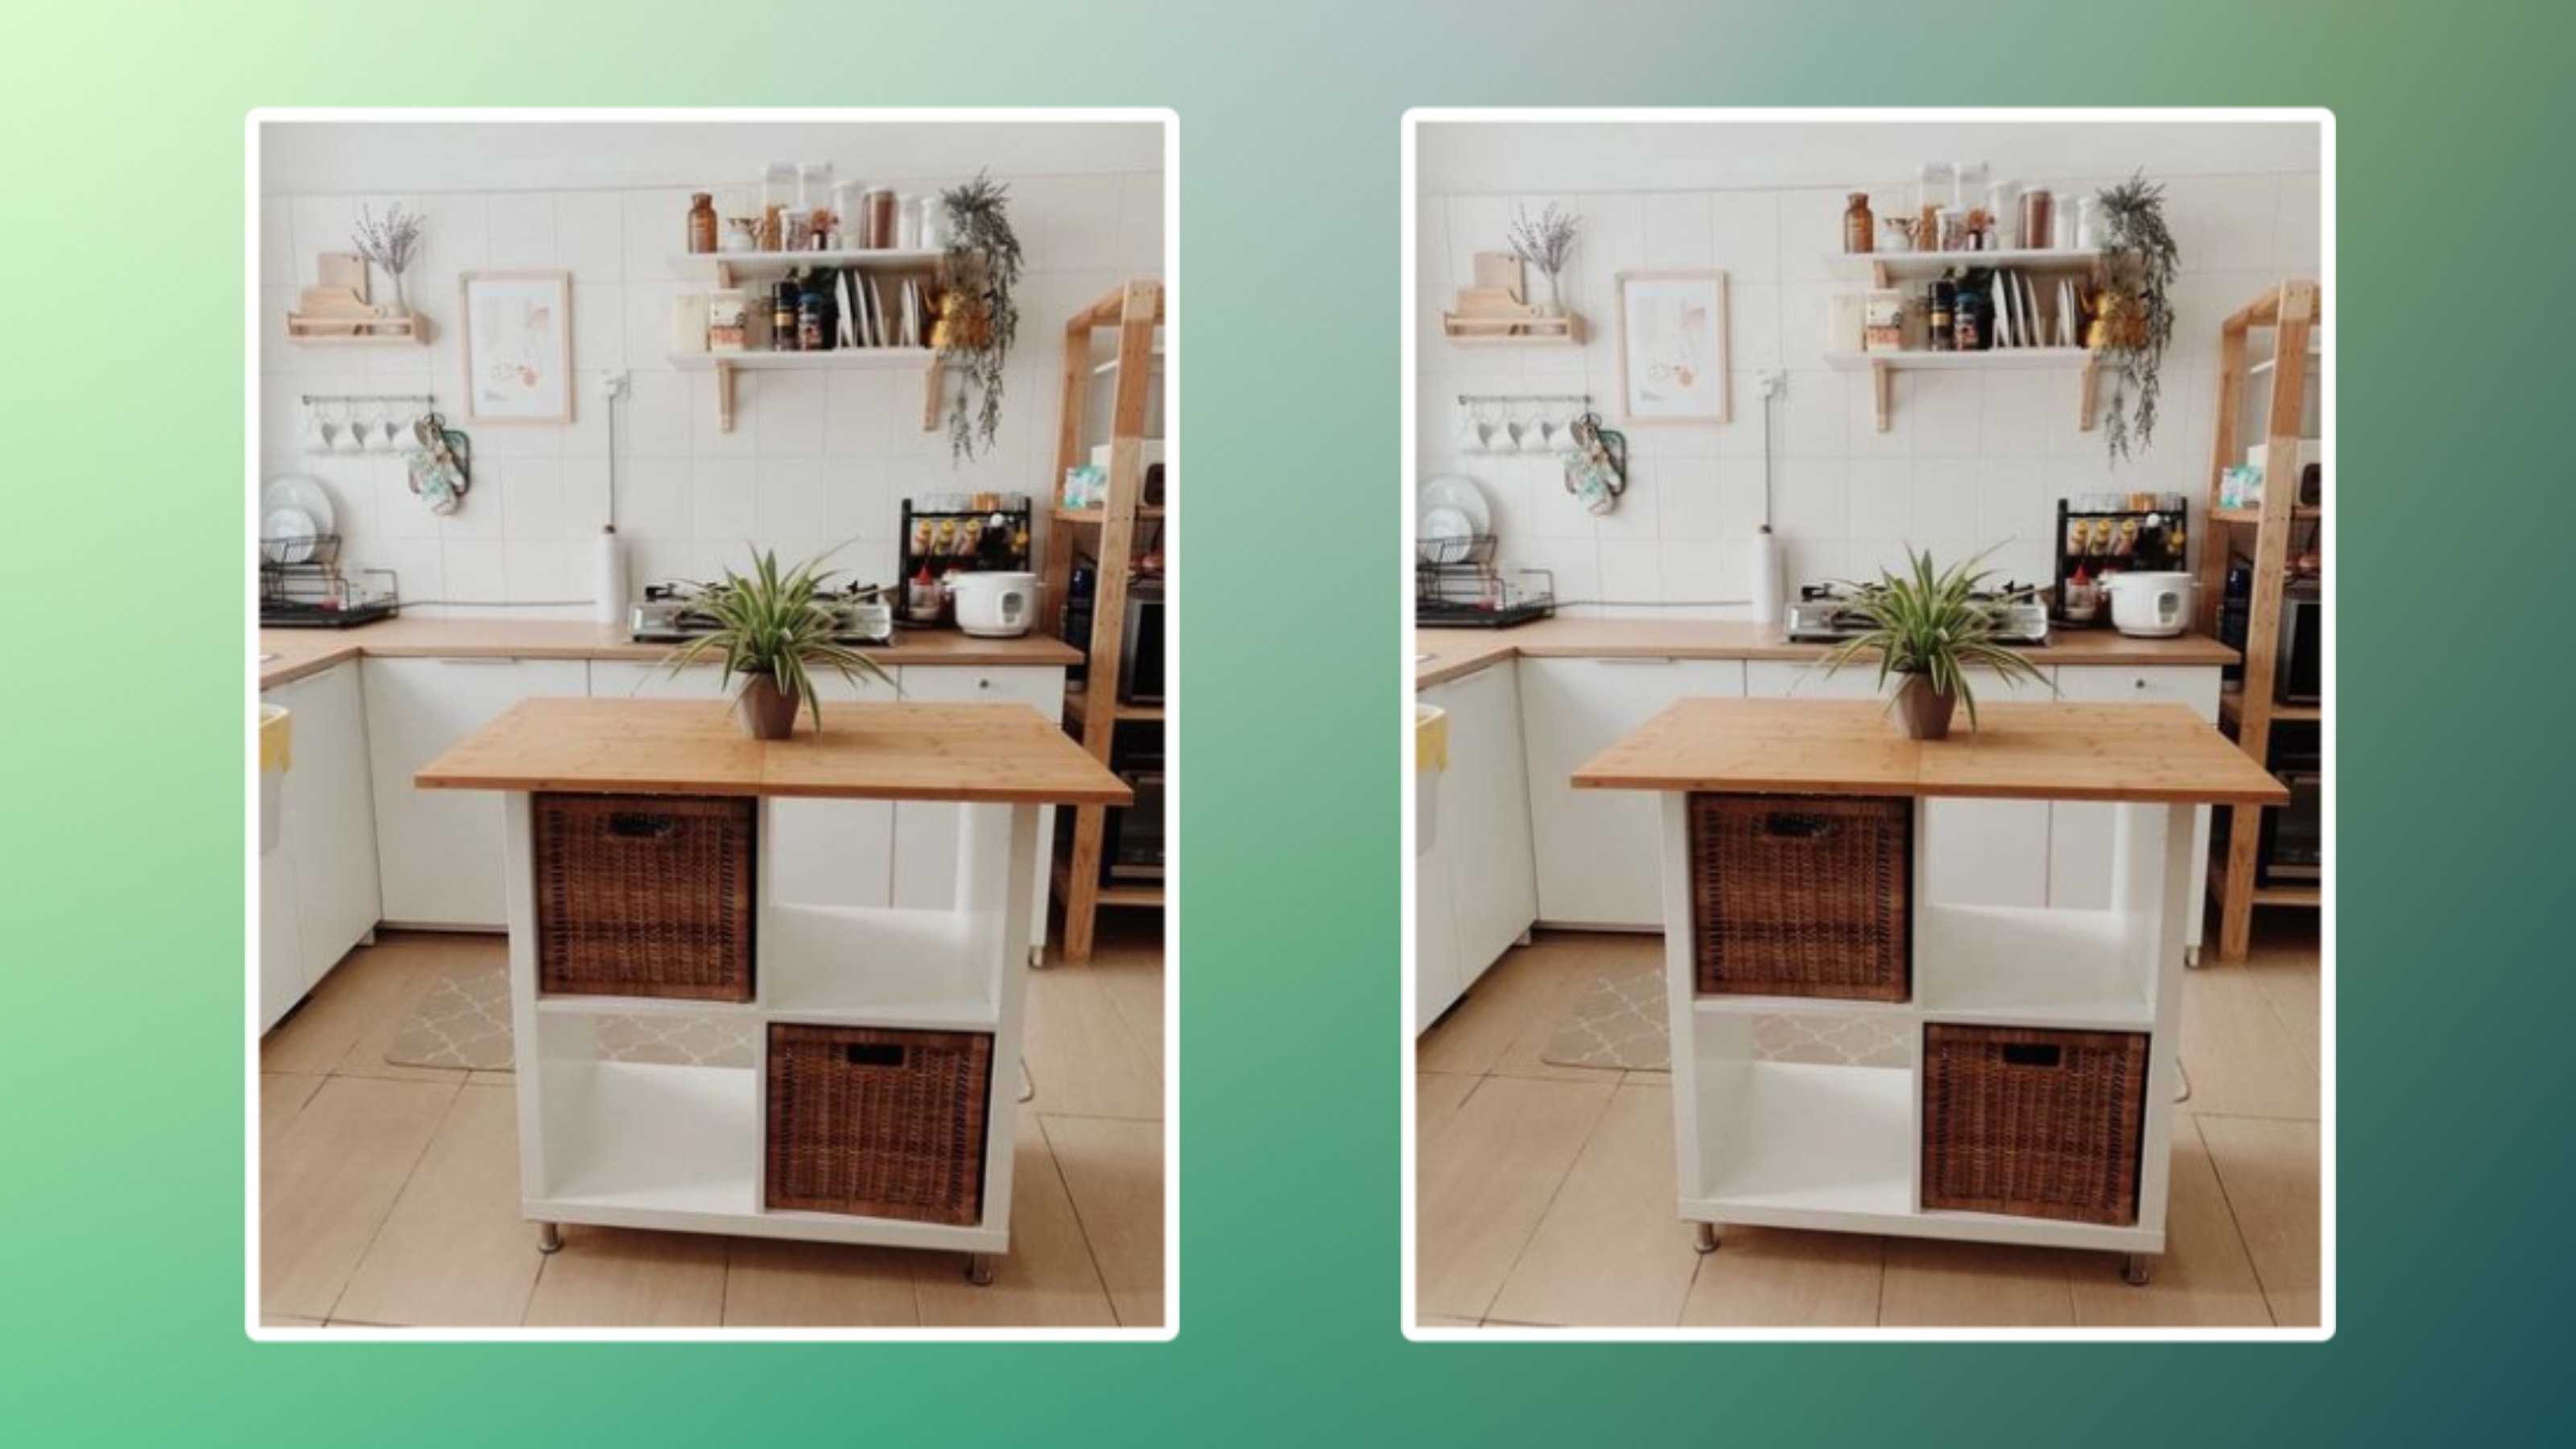 Expanding Our Kitchen Wall Storage with Ikea